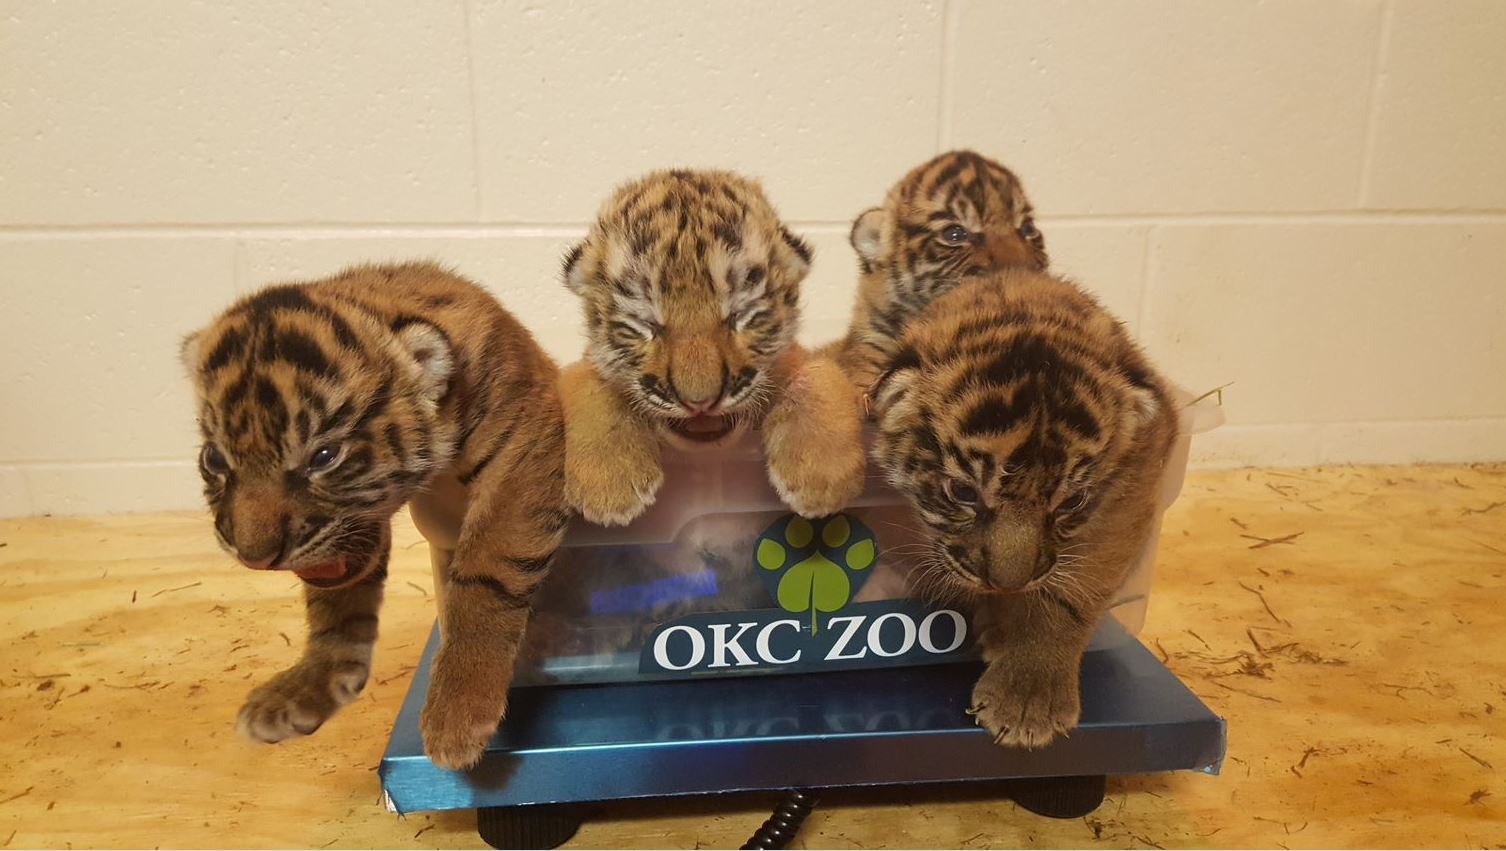 Tiger cub sent to Oklahoma City Zoo accepted by new mother 